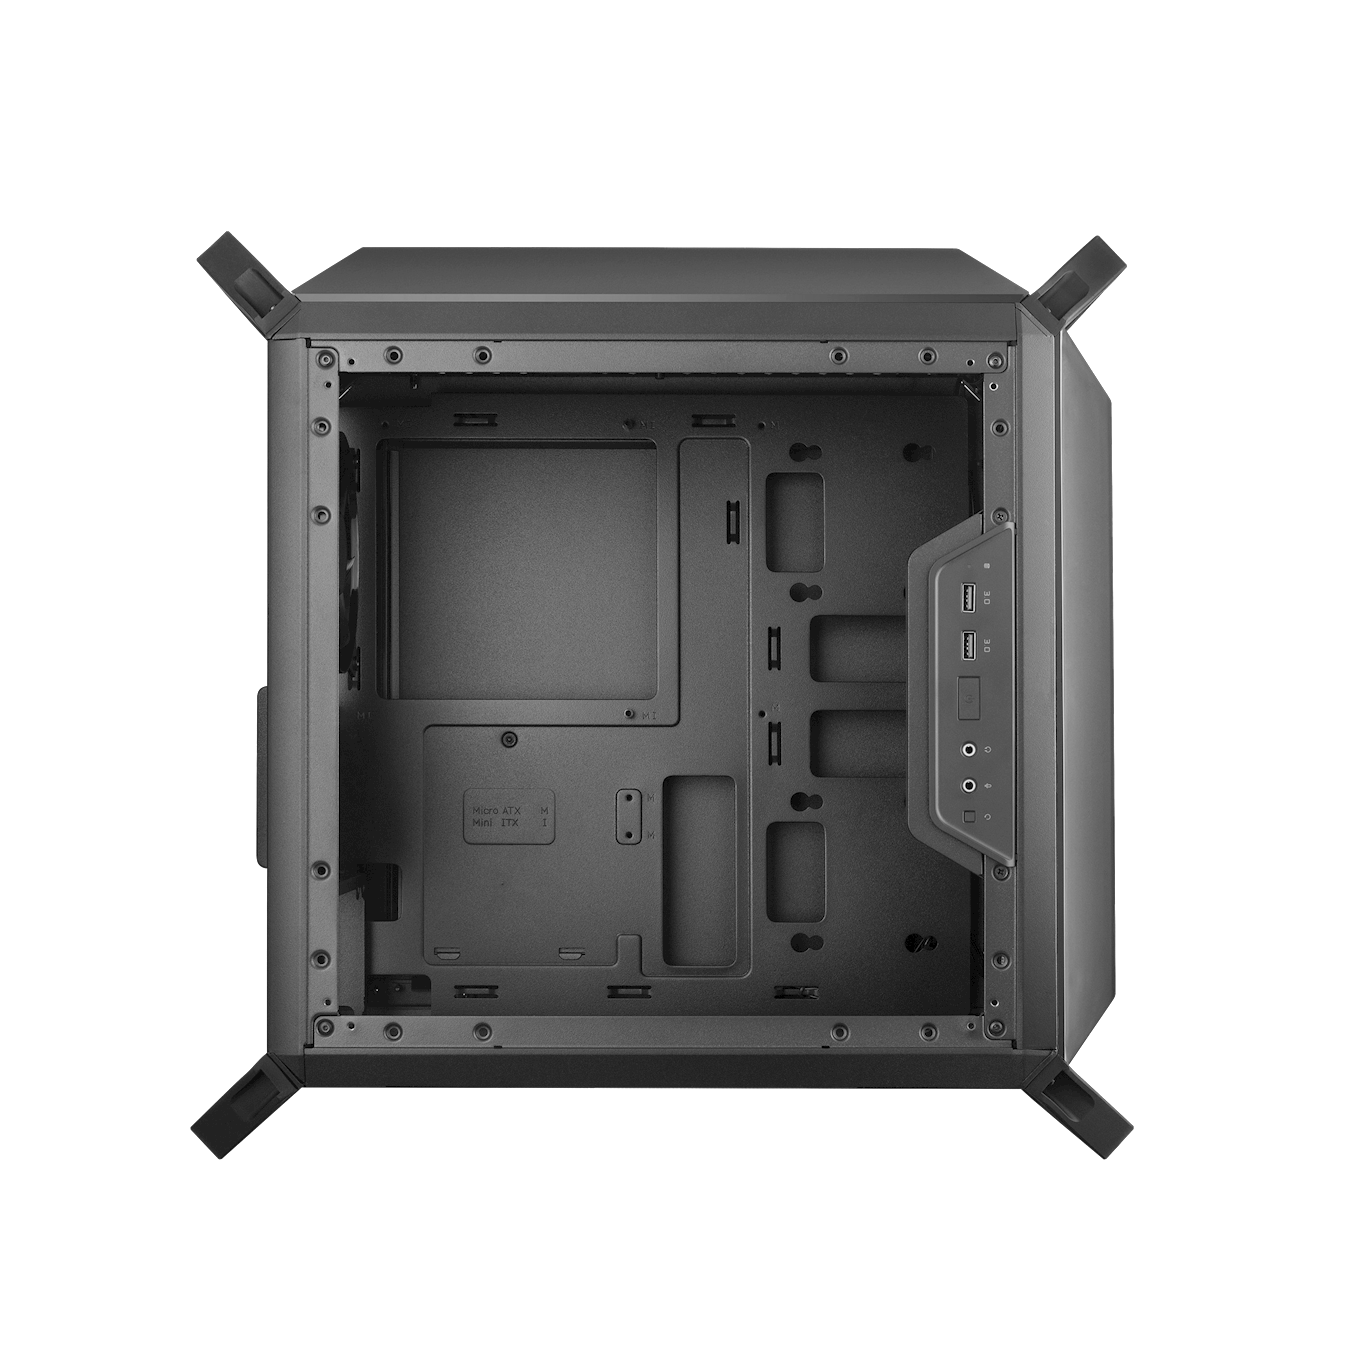 MasterBox Q300P Mini Tower Case - Behind the motherboard tray, it offers 28mm wide and spacy room for hidden cable management.